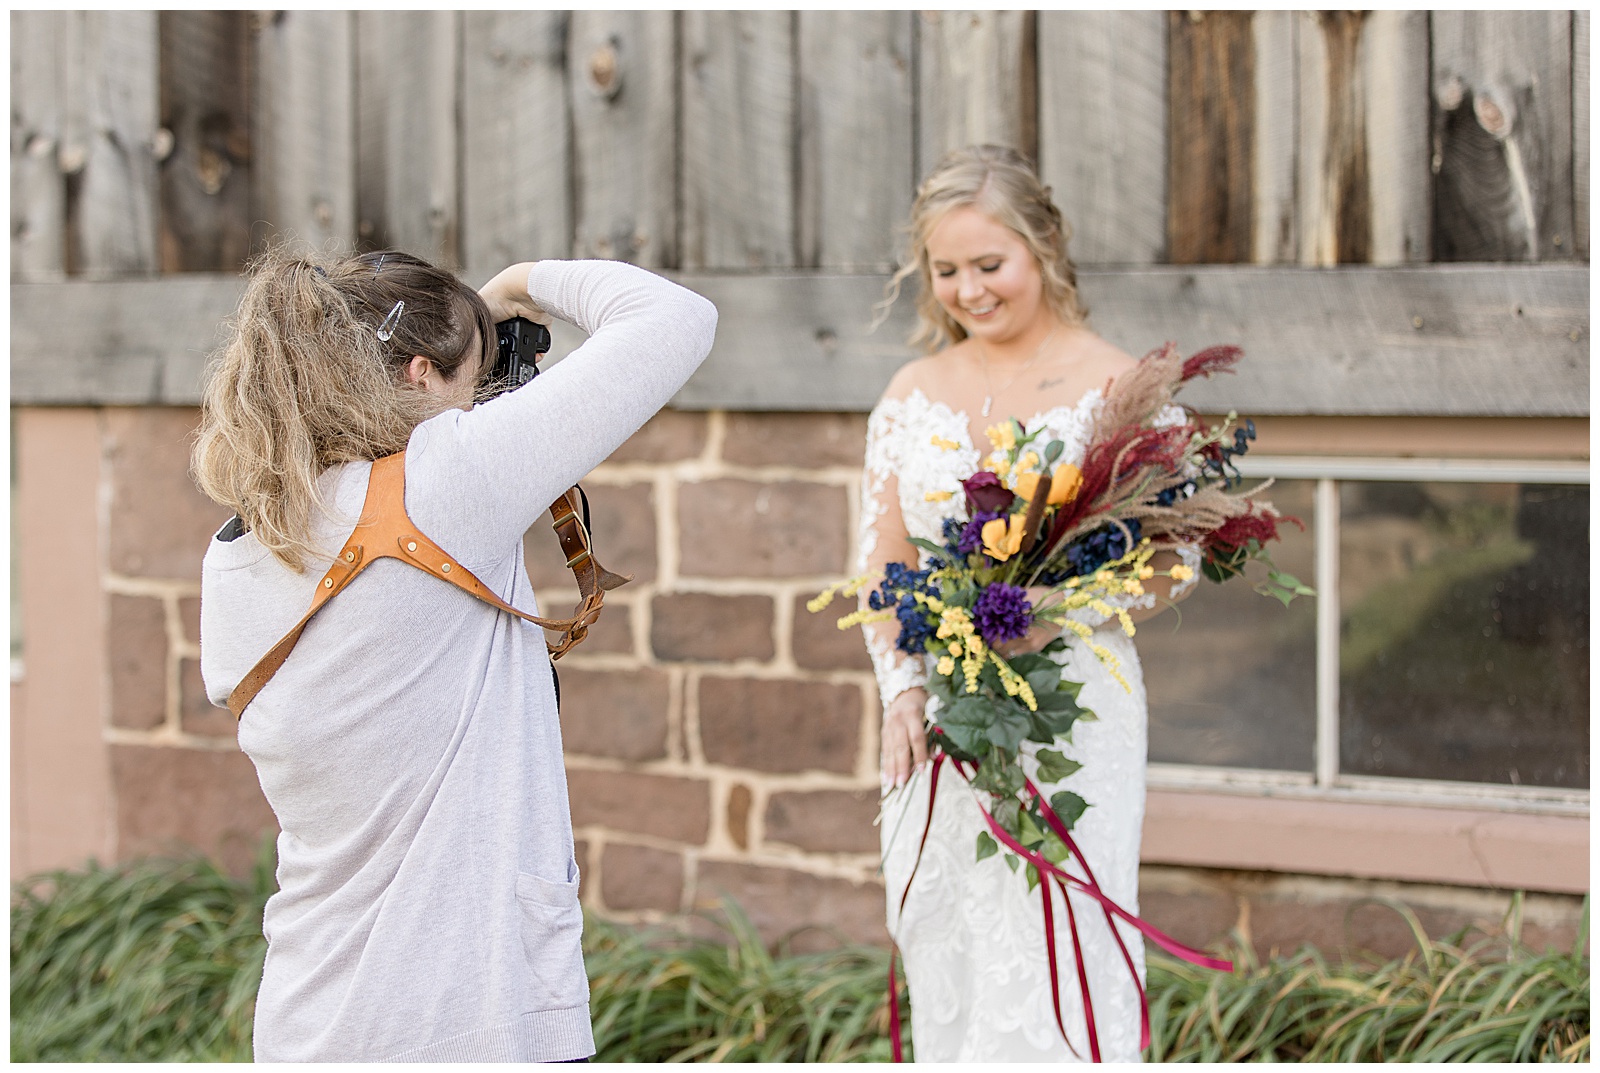 photographer capturing beautiful bride holding colorful fall bouquet by rustic wooden barn in york, pennsylvania